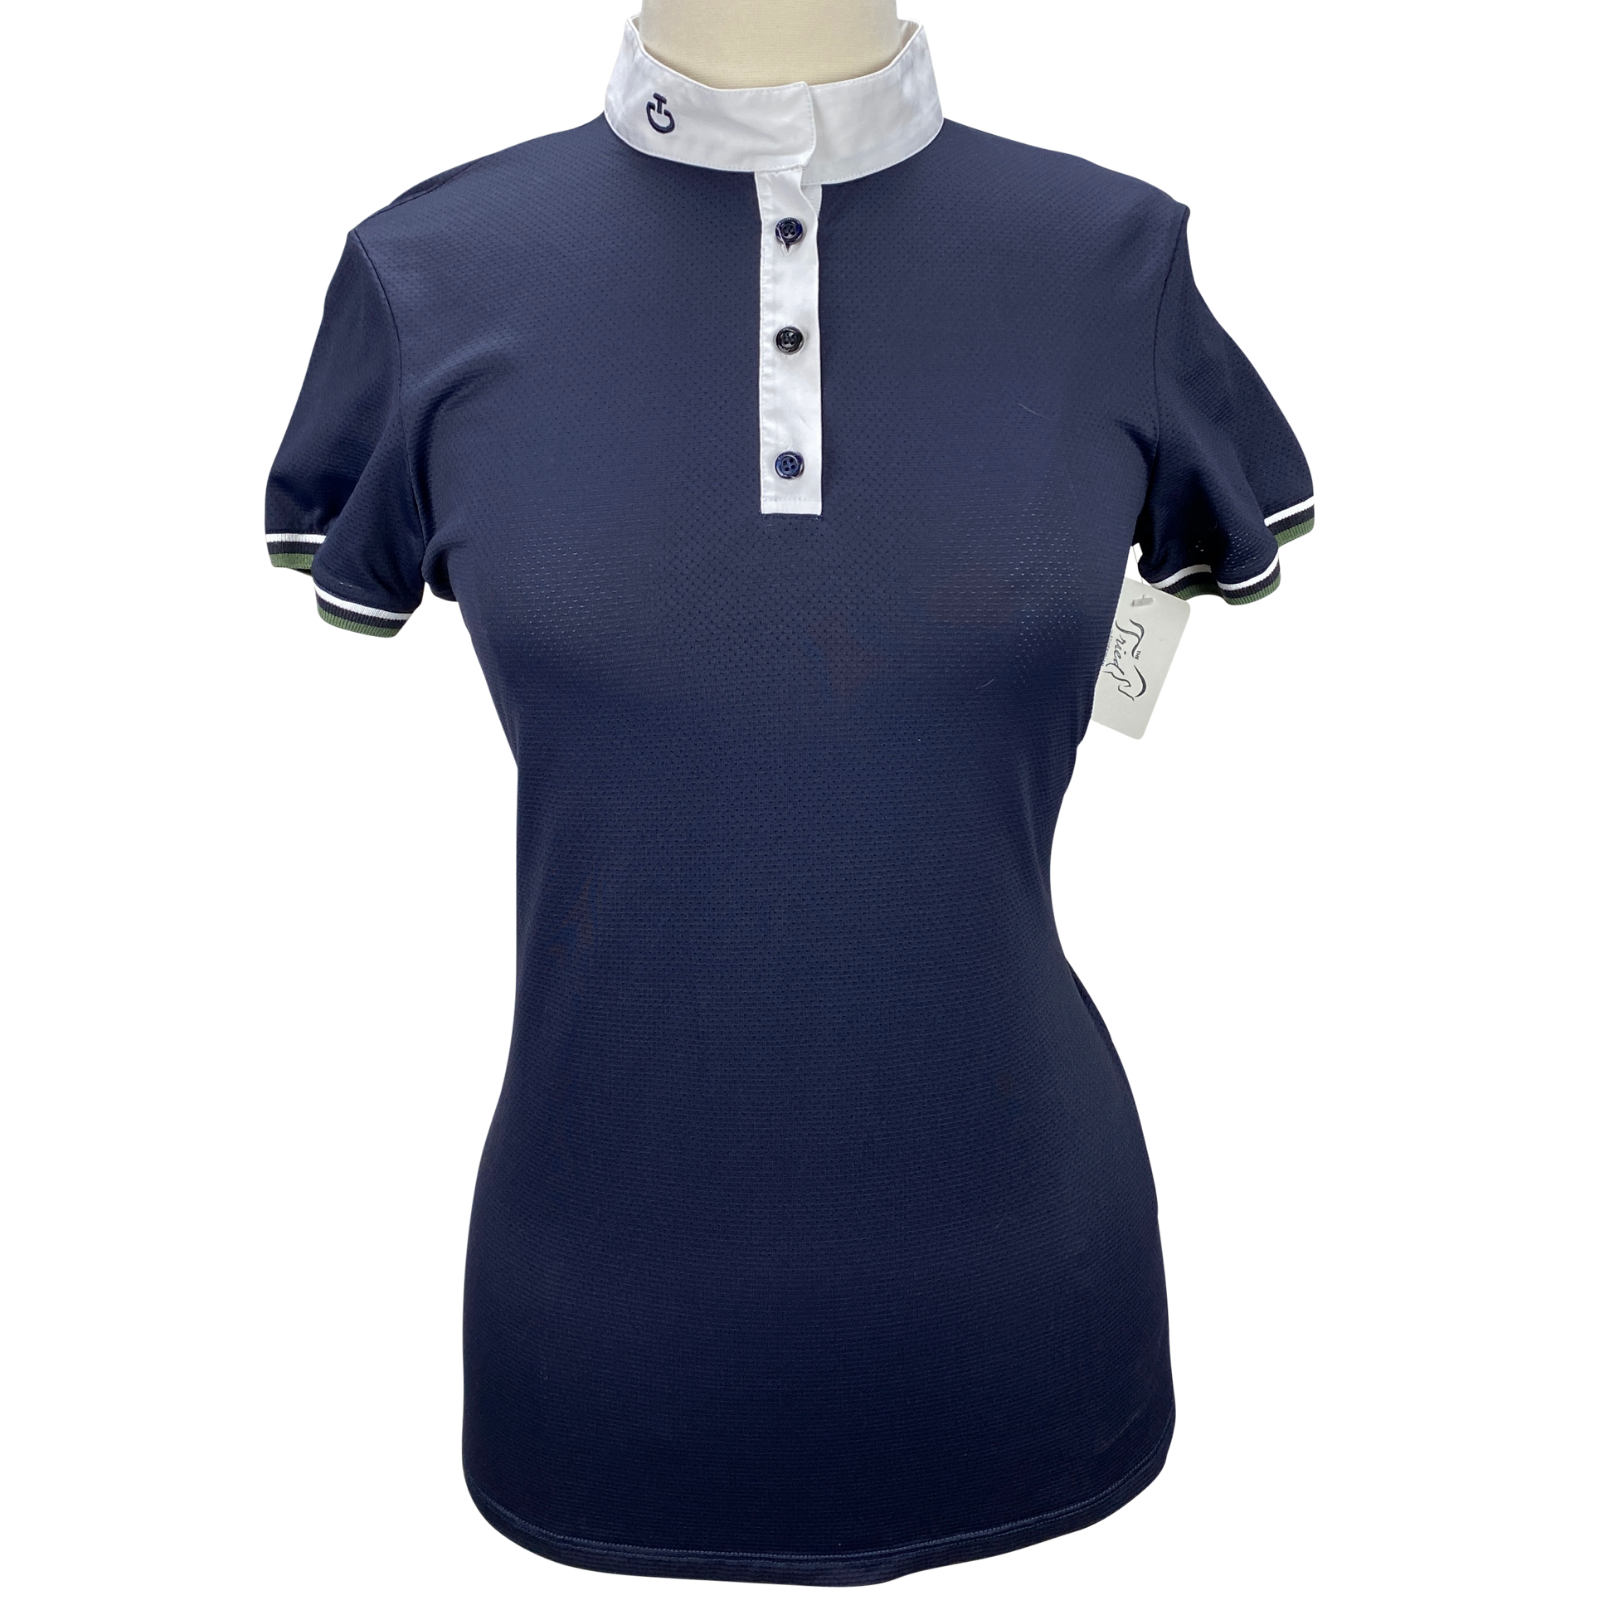 Cavalleria Toscana – Tagged SHORT SLEEVE – The Tried Equestrian